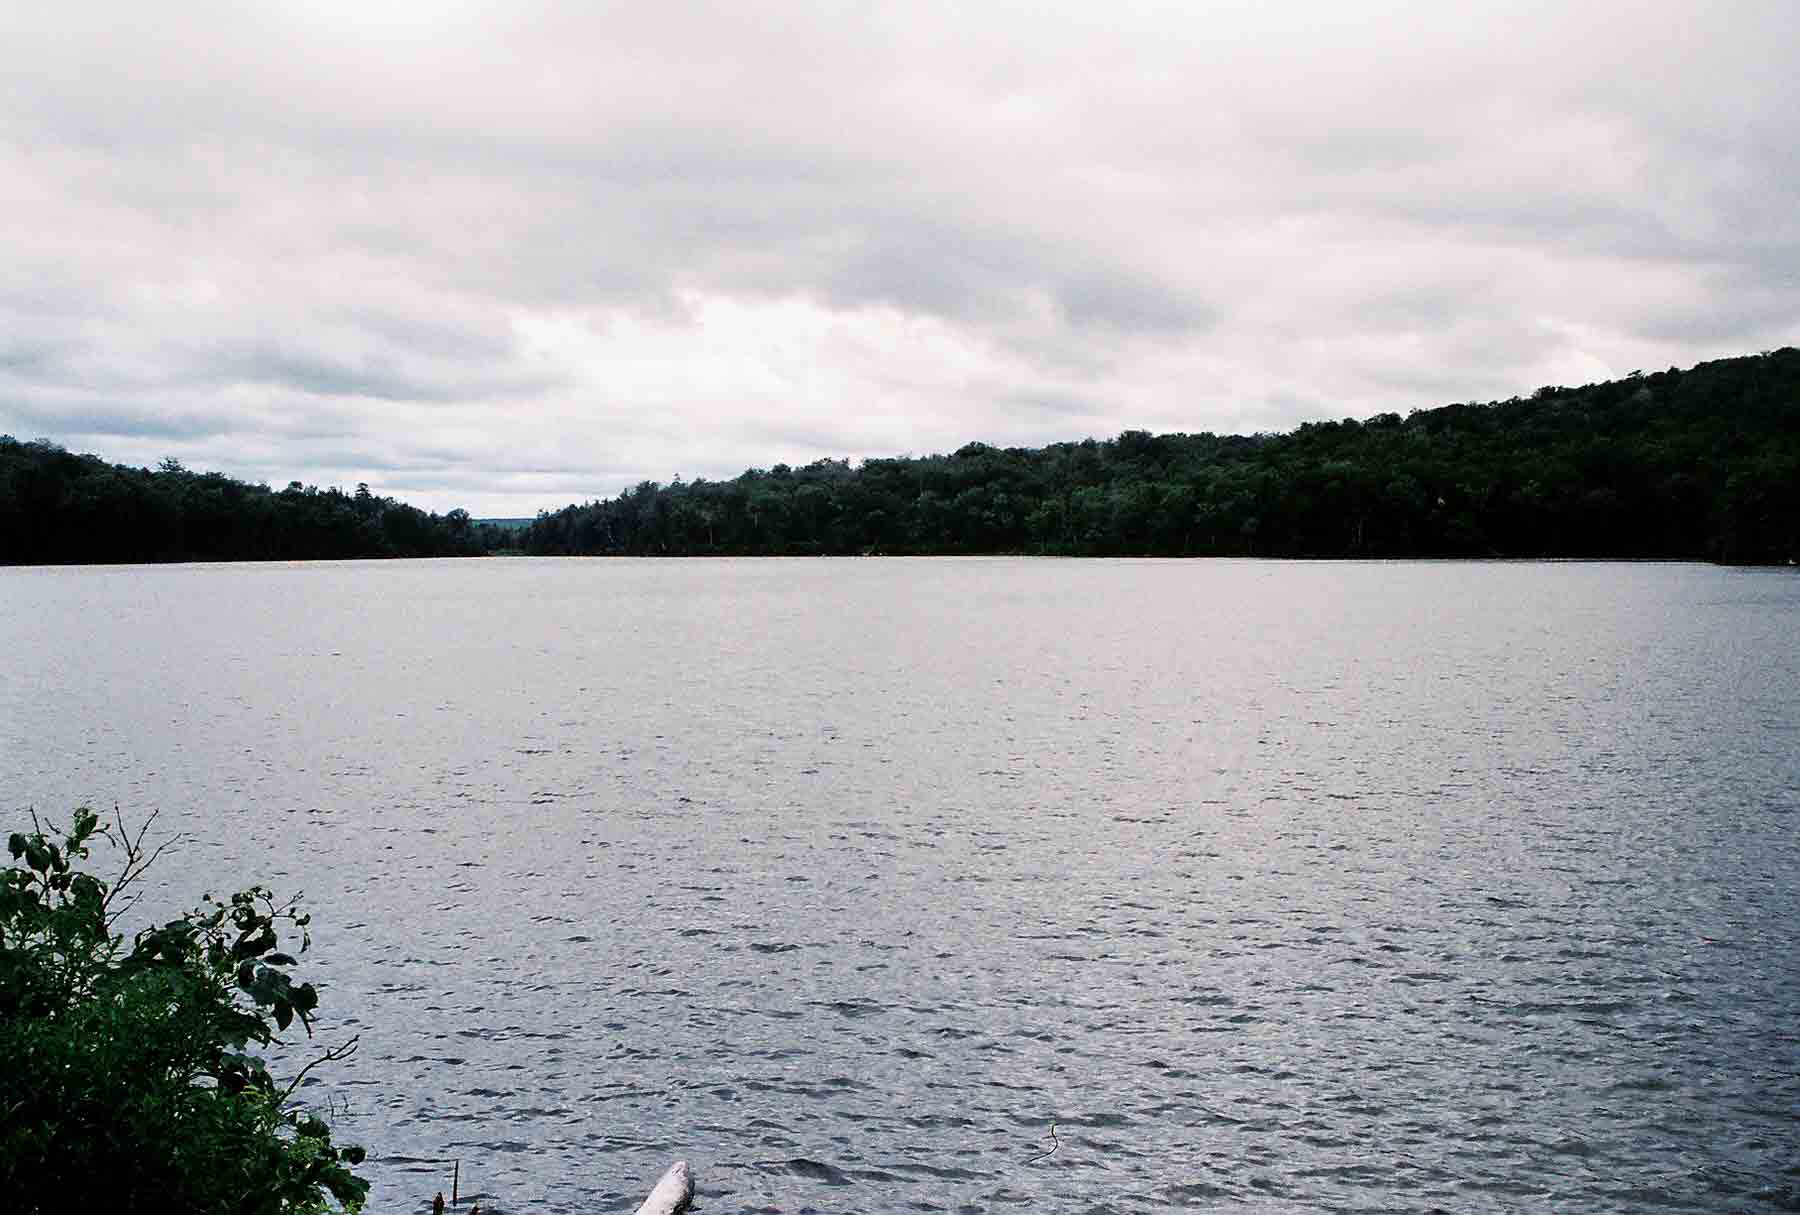 mm 10.5 - View west across Stratton Pond. Courtesy dlcul@conncoll.edu